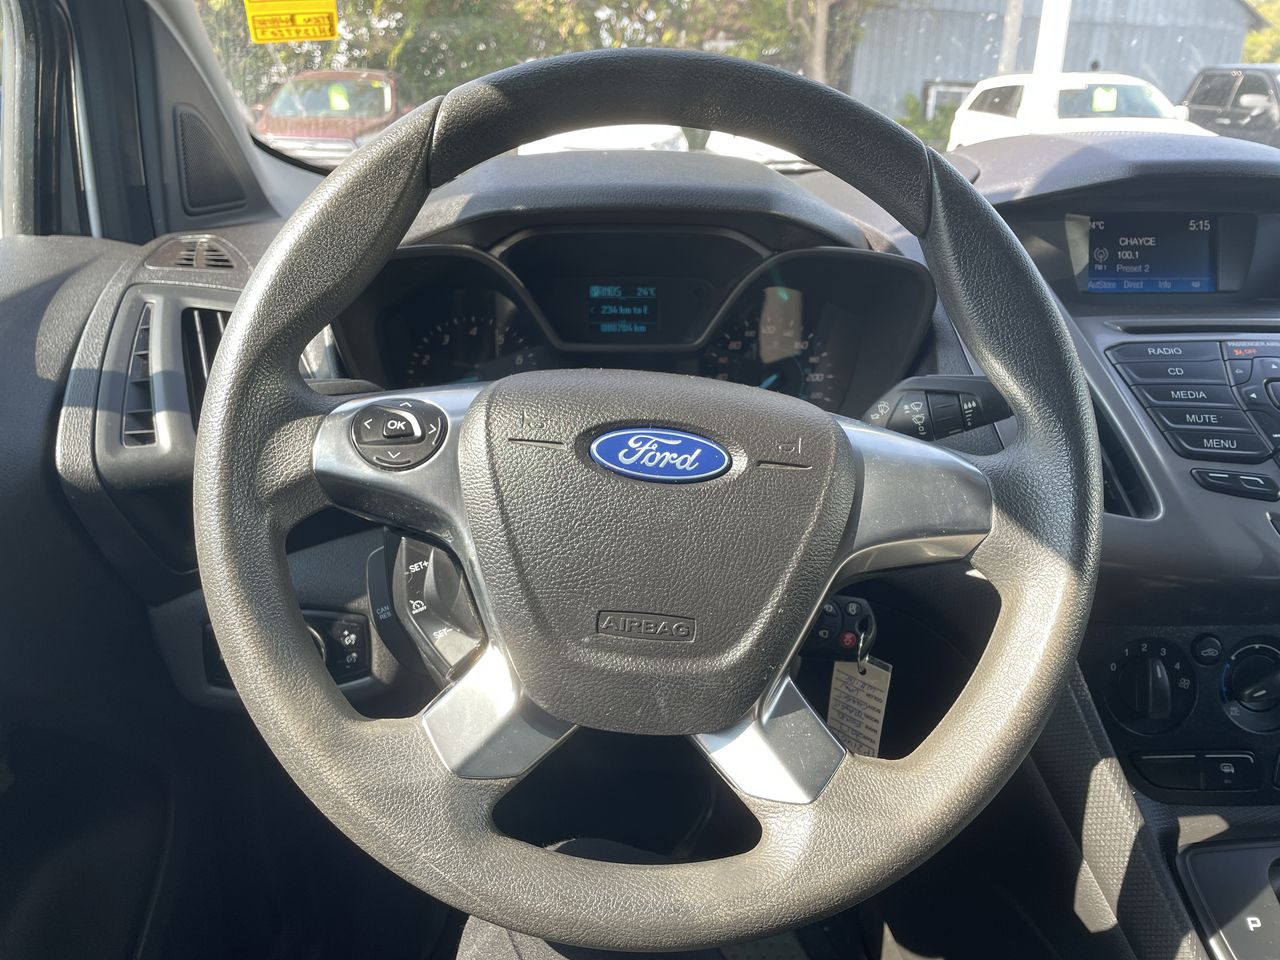 2017 Ford Transit Connect - P21401 Full Image 14